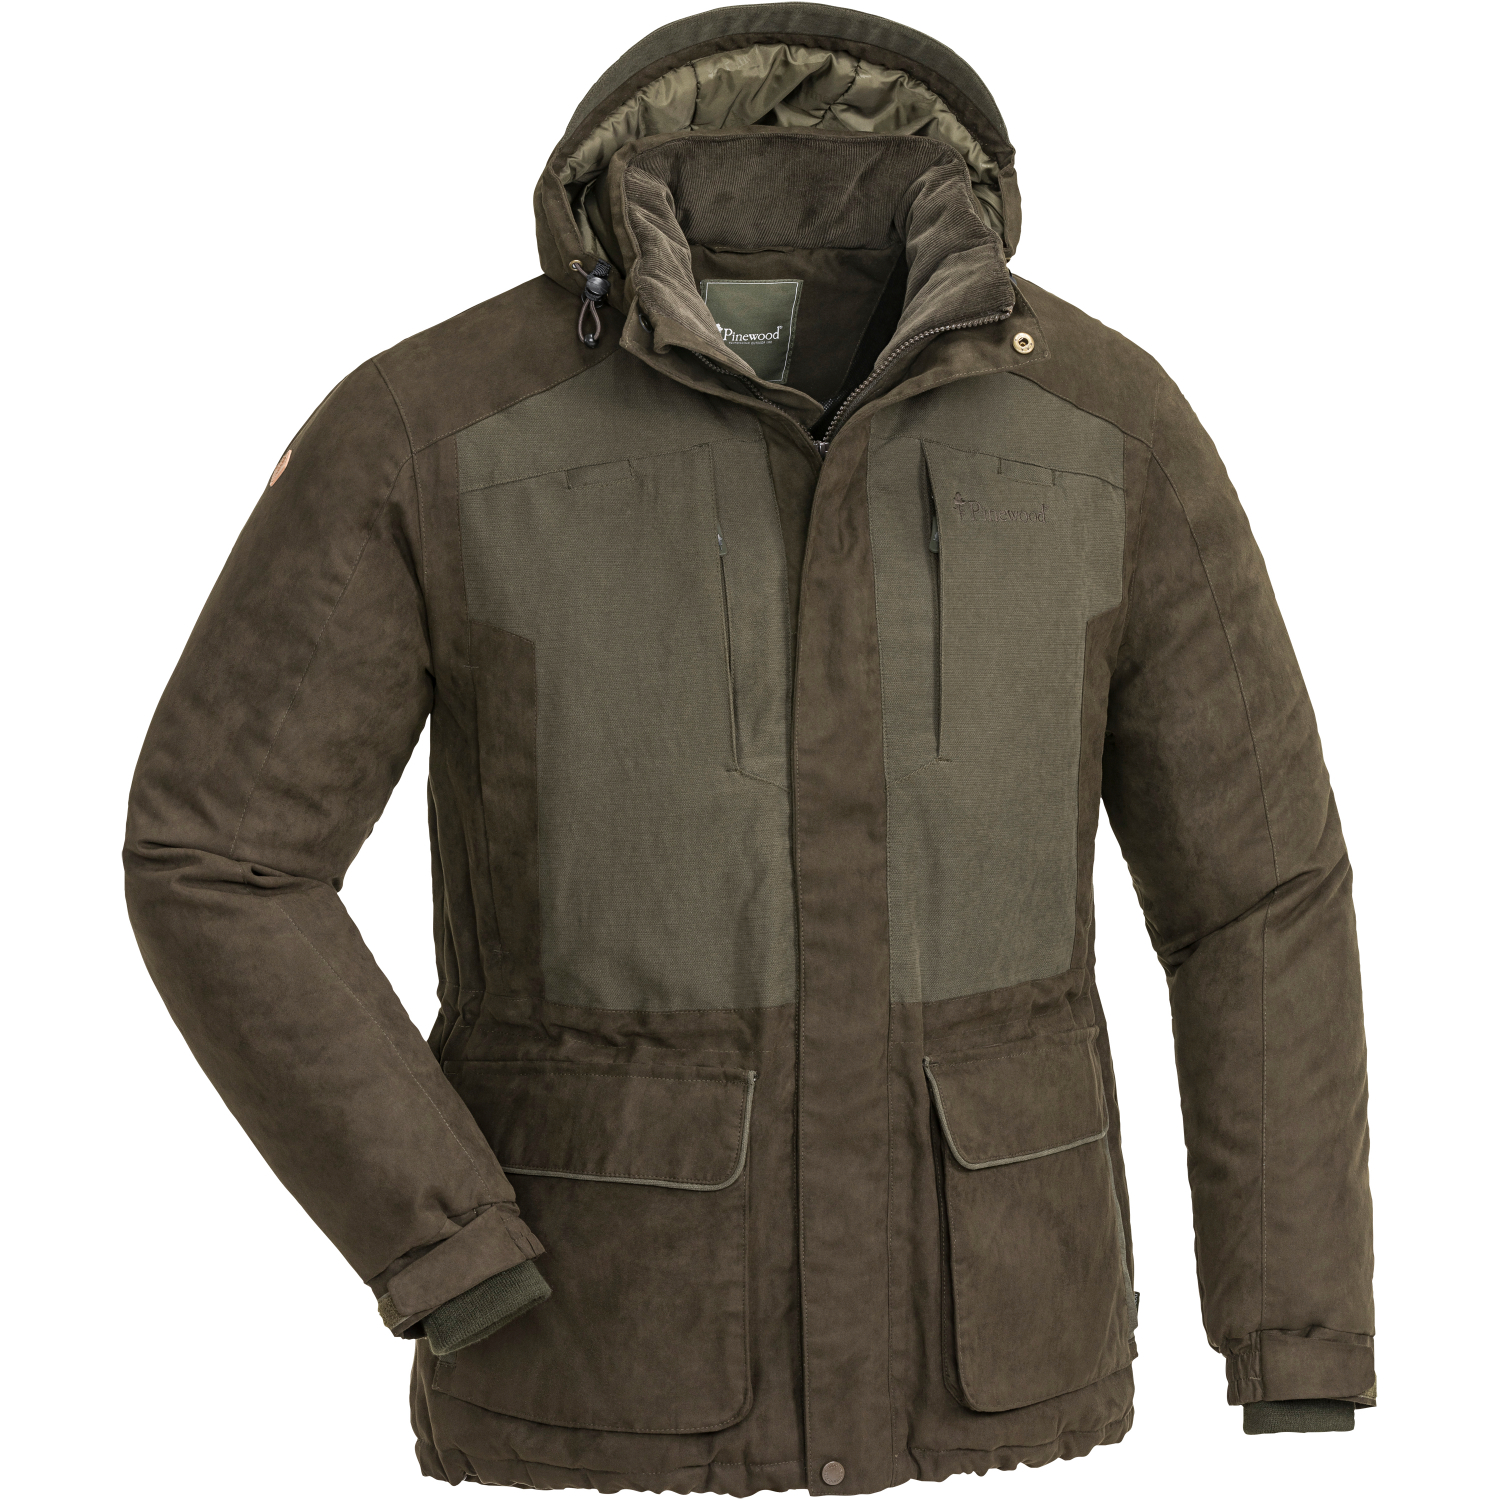 Drake Waterfowl Refuge 3.0 3-in-1 Hunting Jacket - 717728, Camo Jackets at  Sportsman's Guide